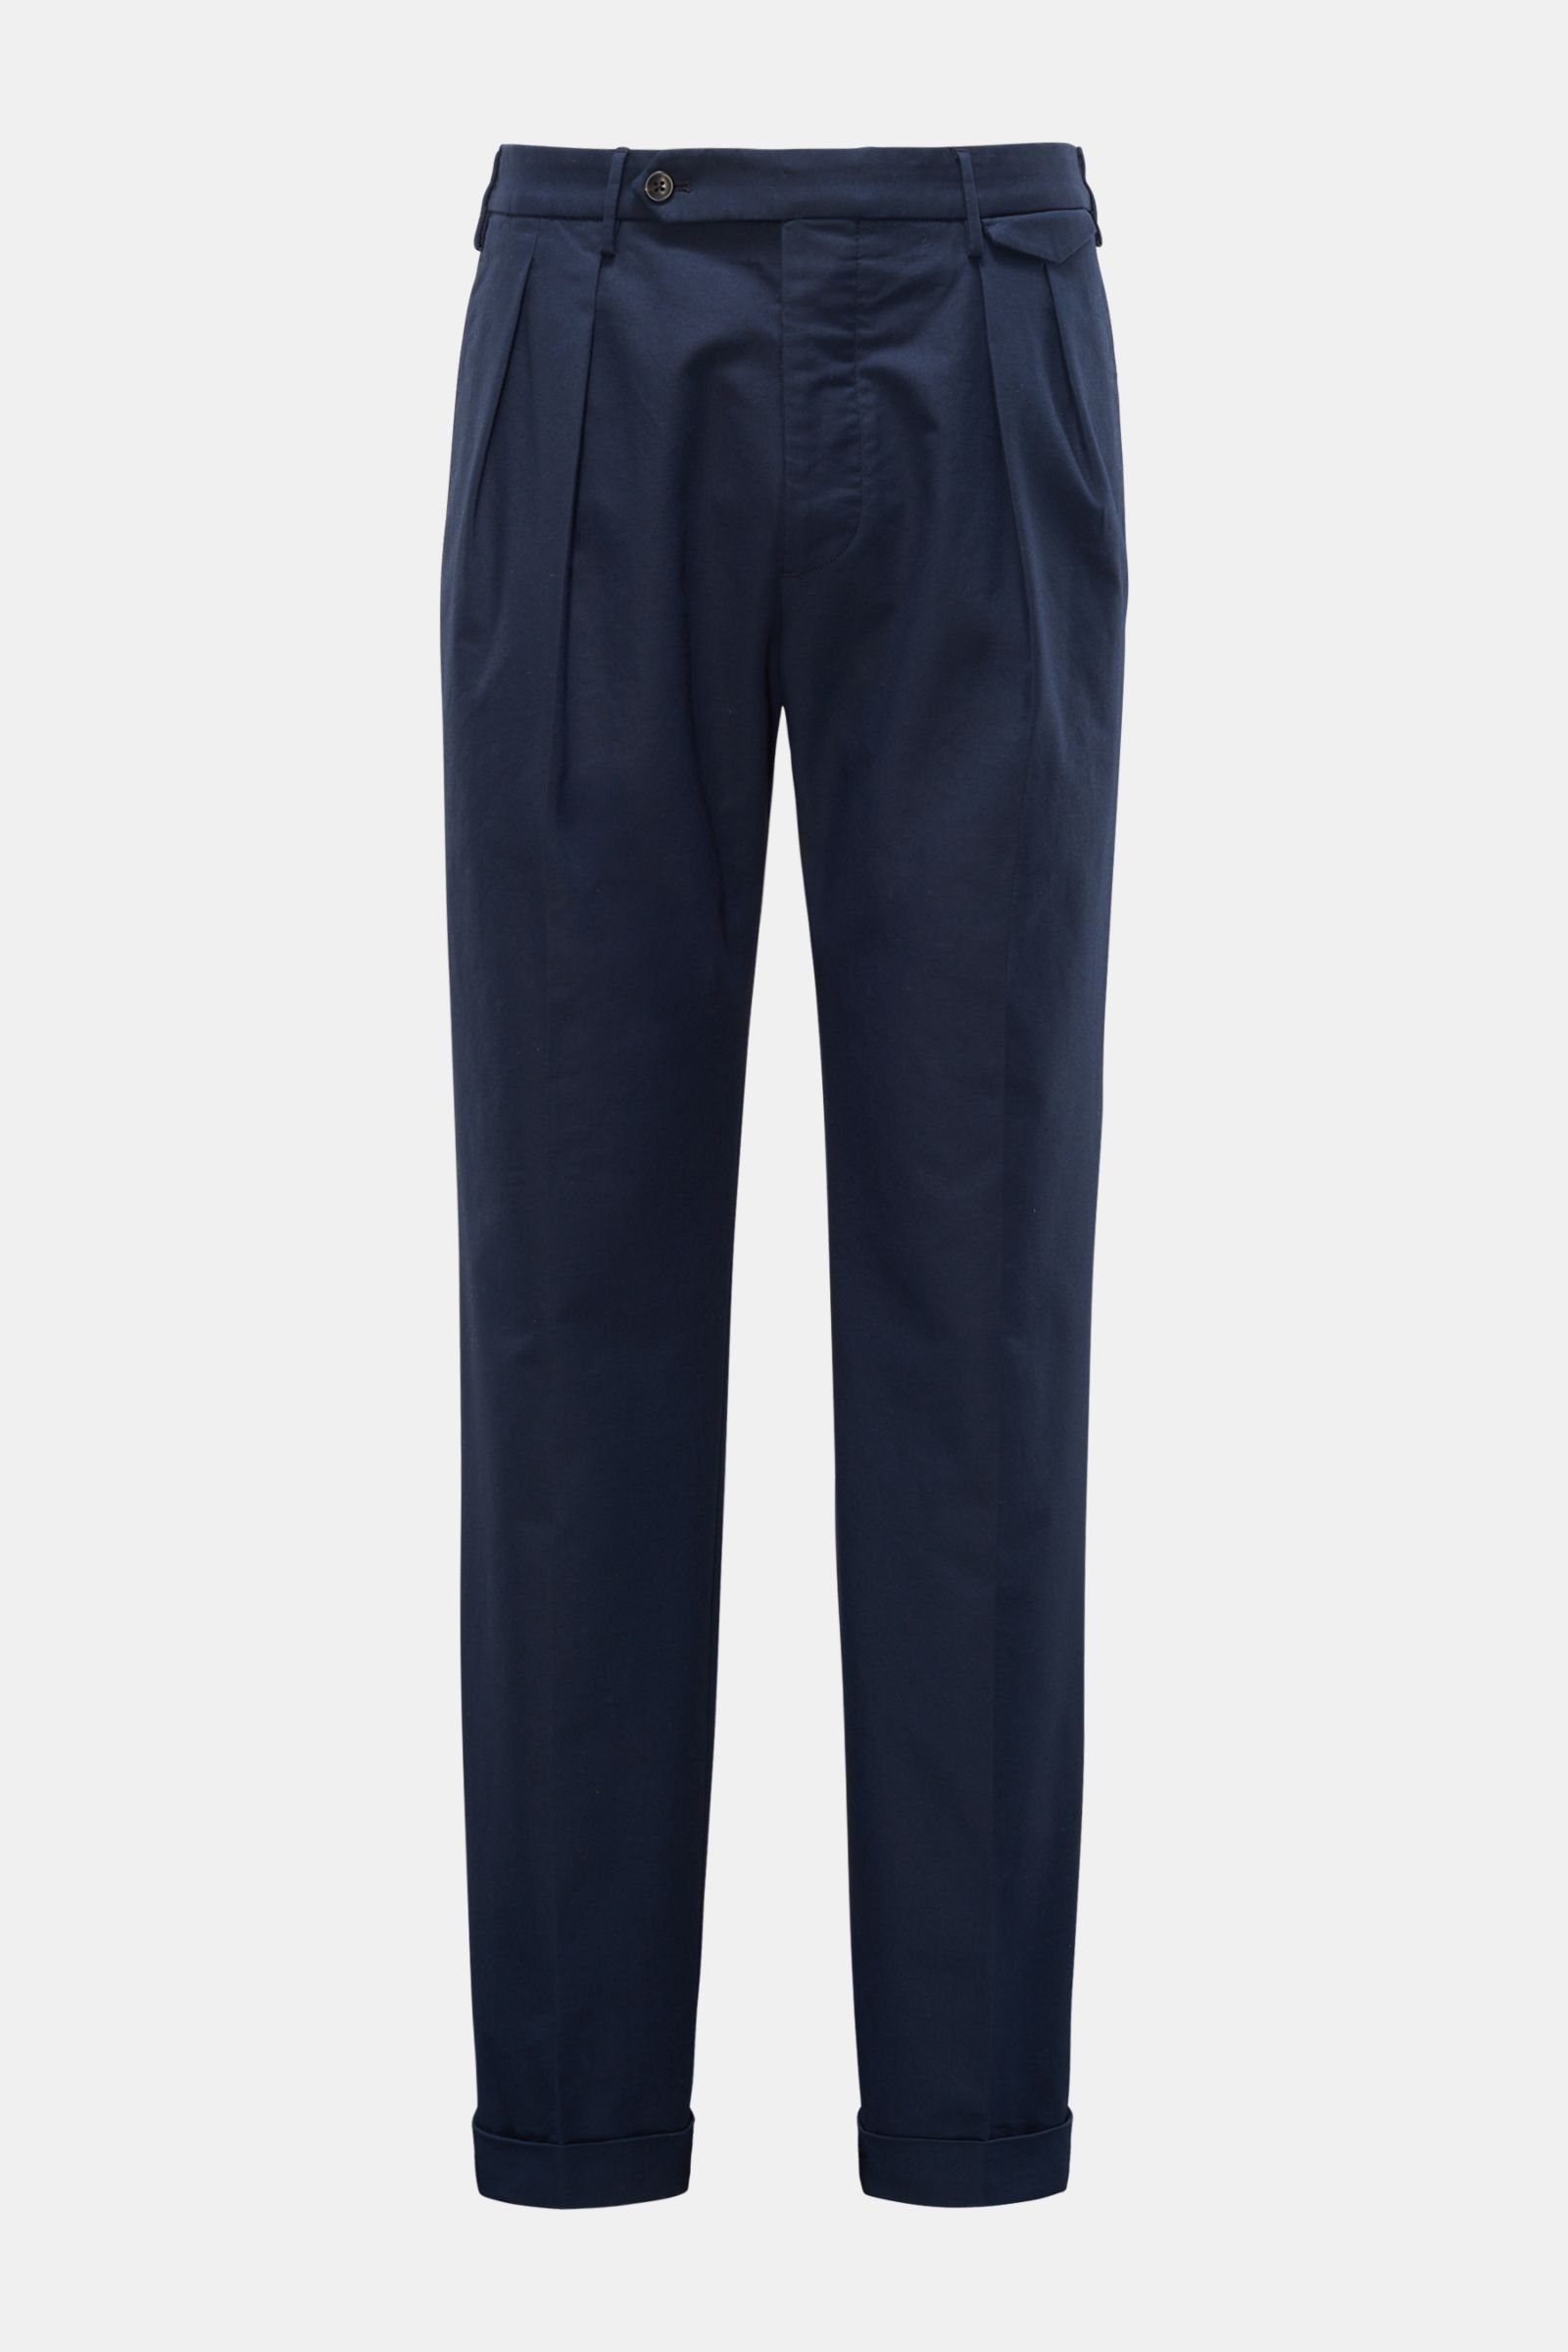 Cotton trousers 'High Comfort' navy 